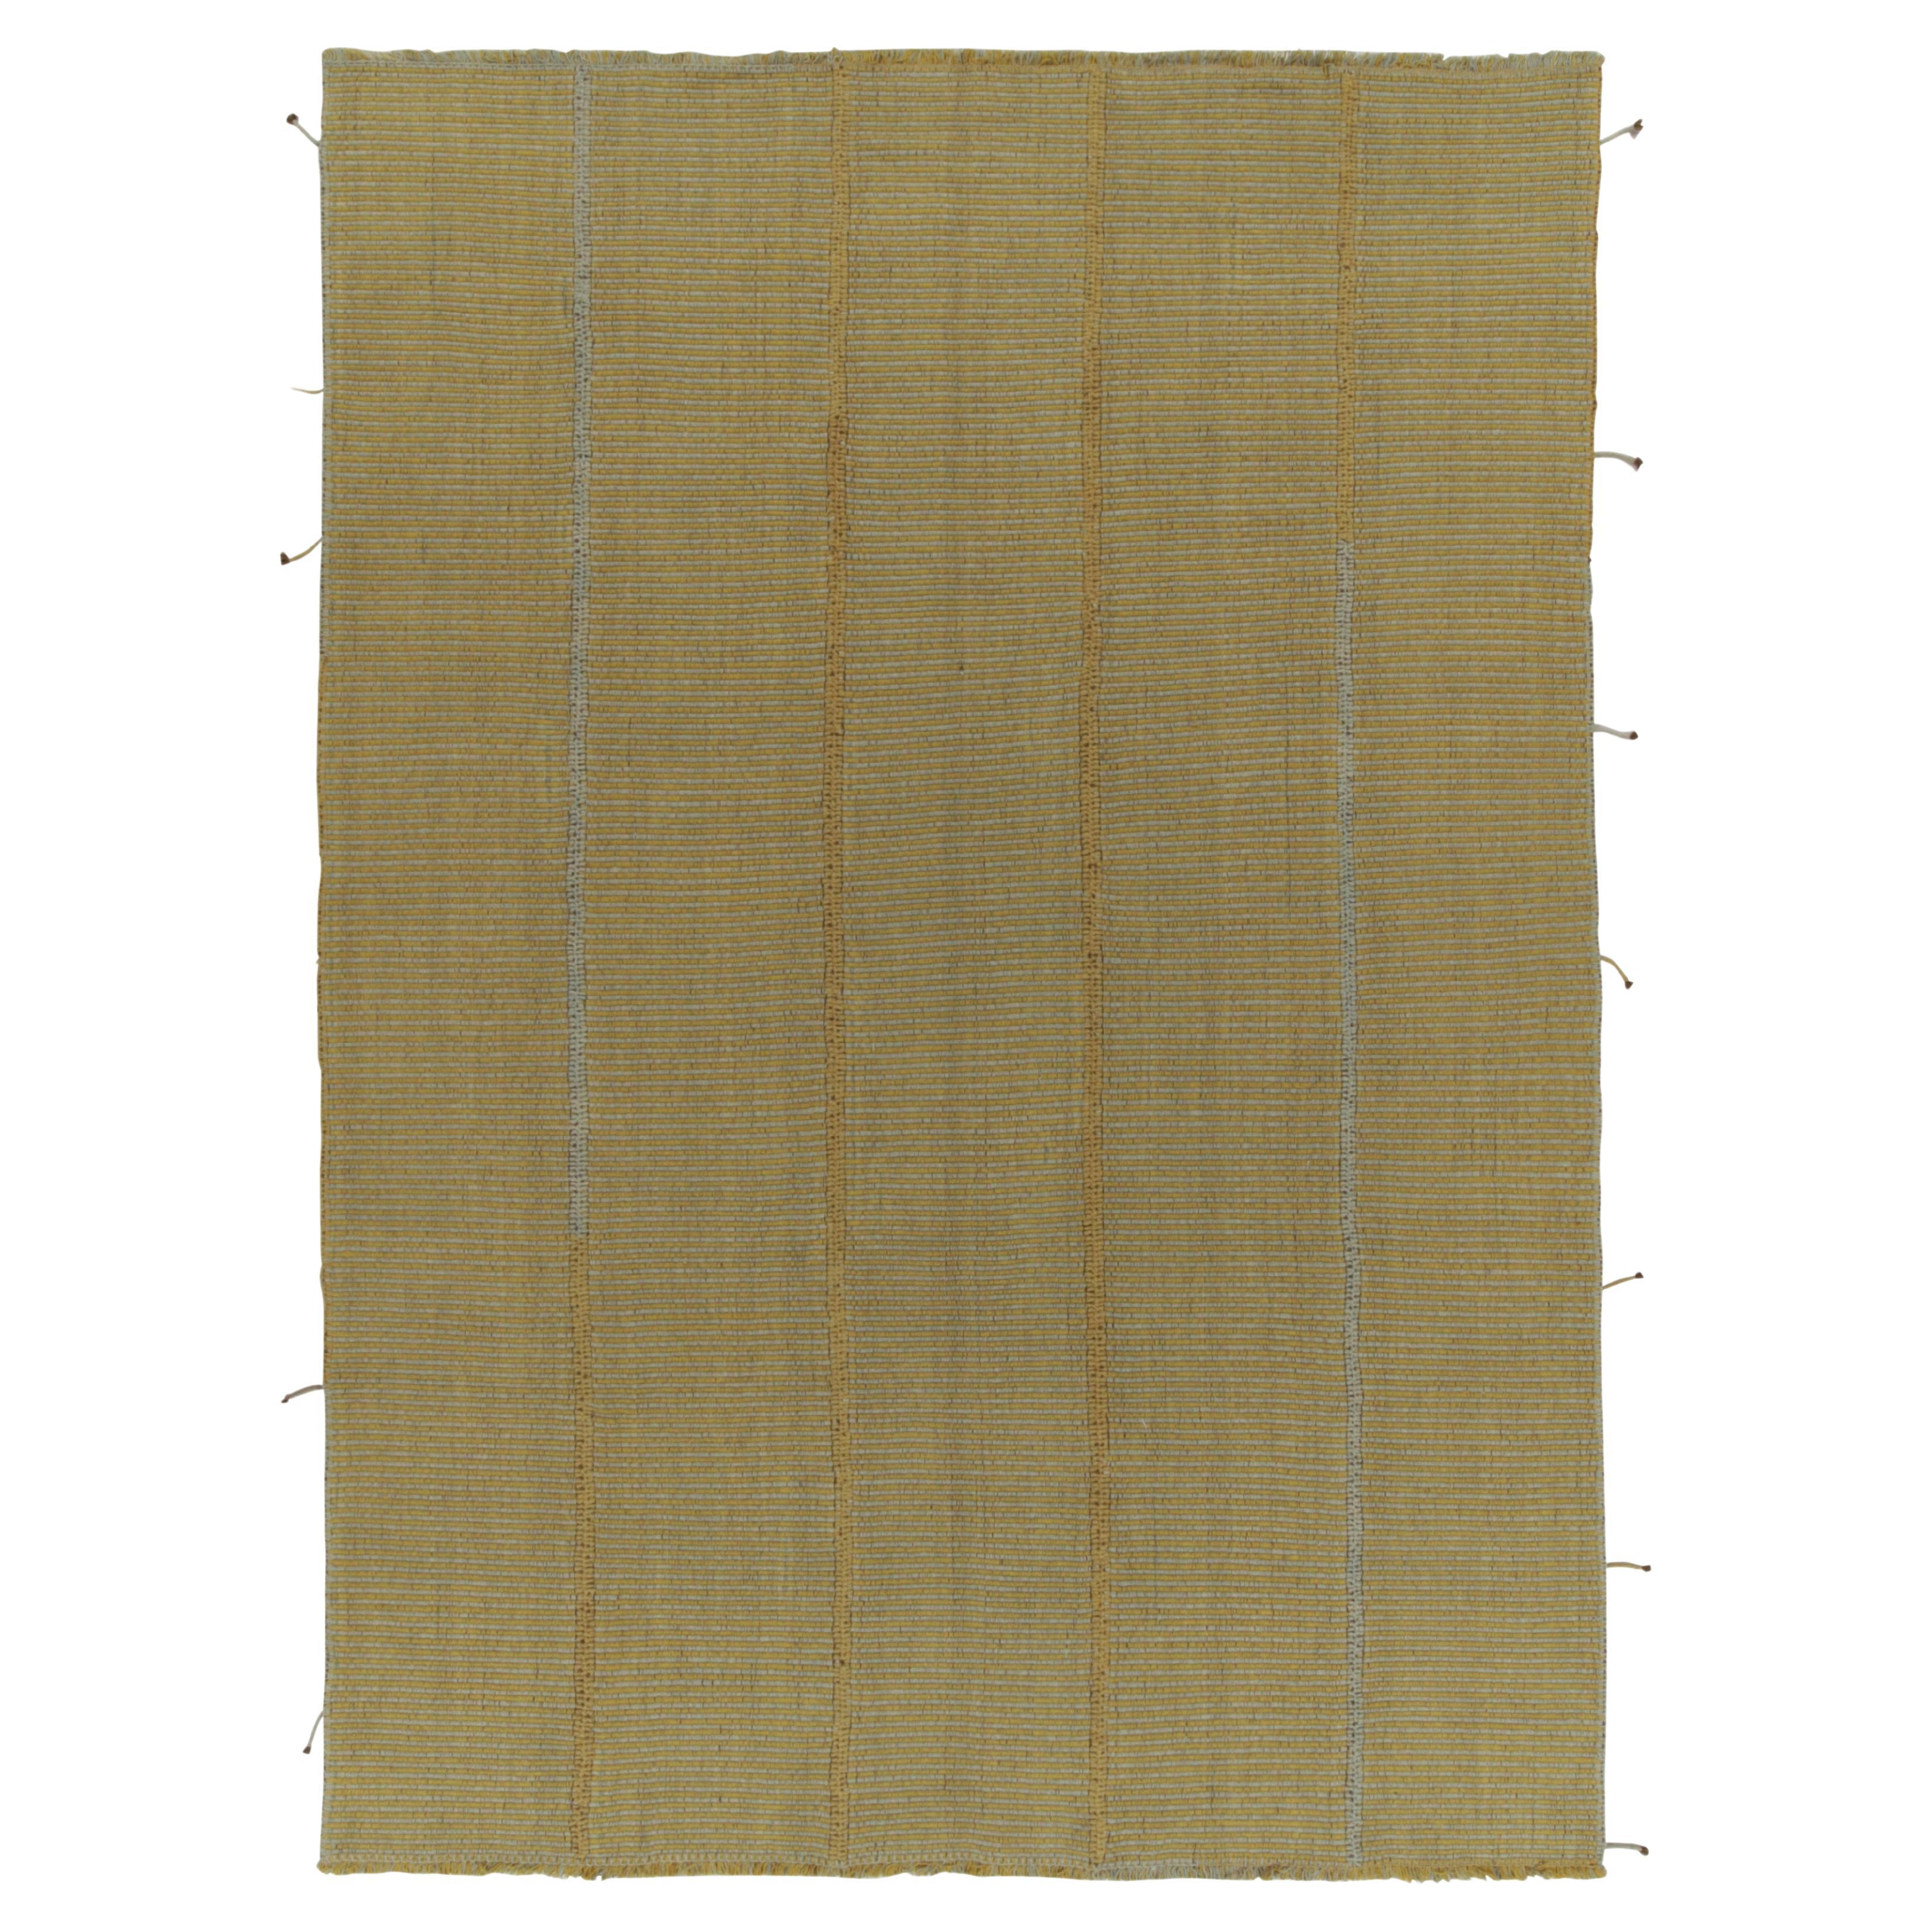 Rug & Kilim’s Contemporary Kilim in Golden-Yellow with Blue Stripes & Accents